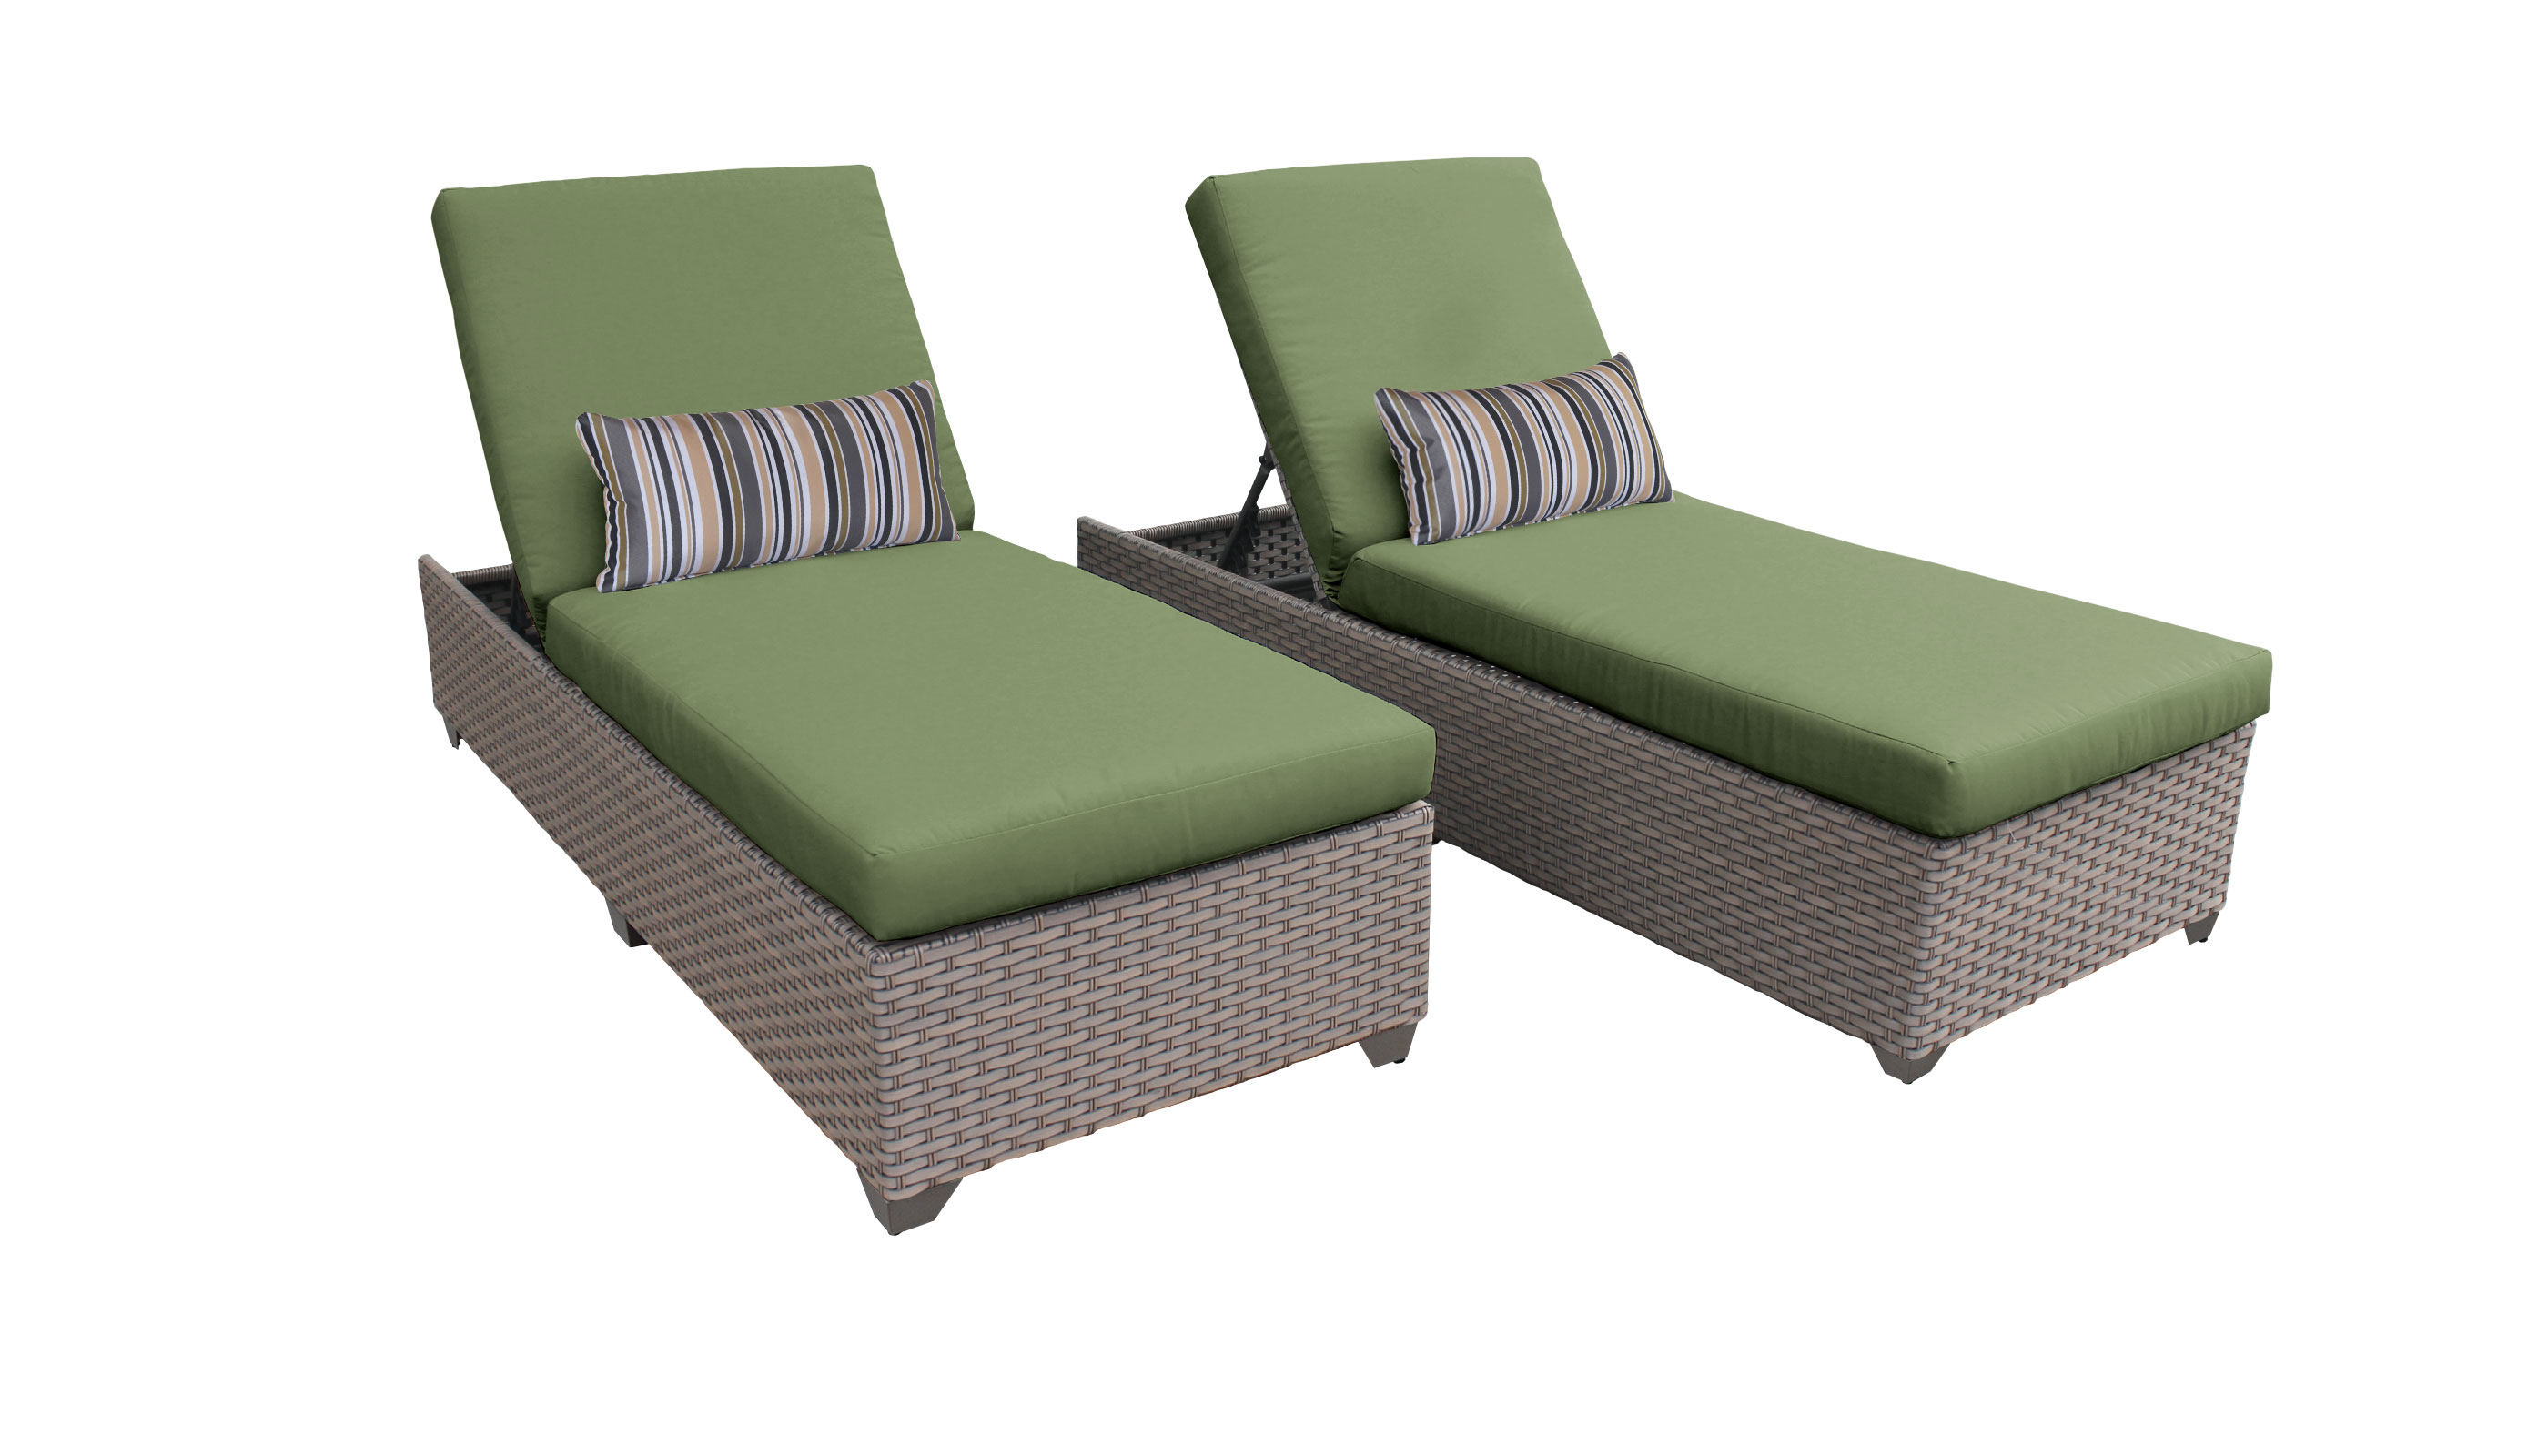 Oasis Chaise Set of 2 Outdoor Wicker Patio Furniture - image 1 of 2